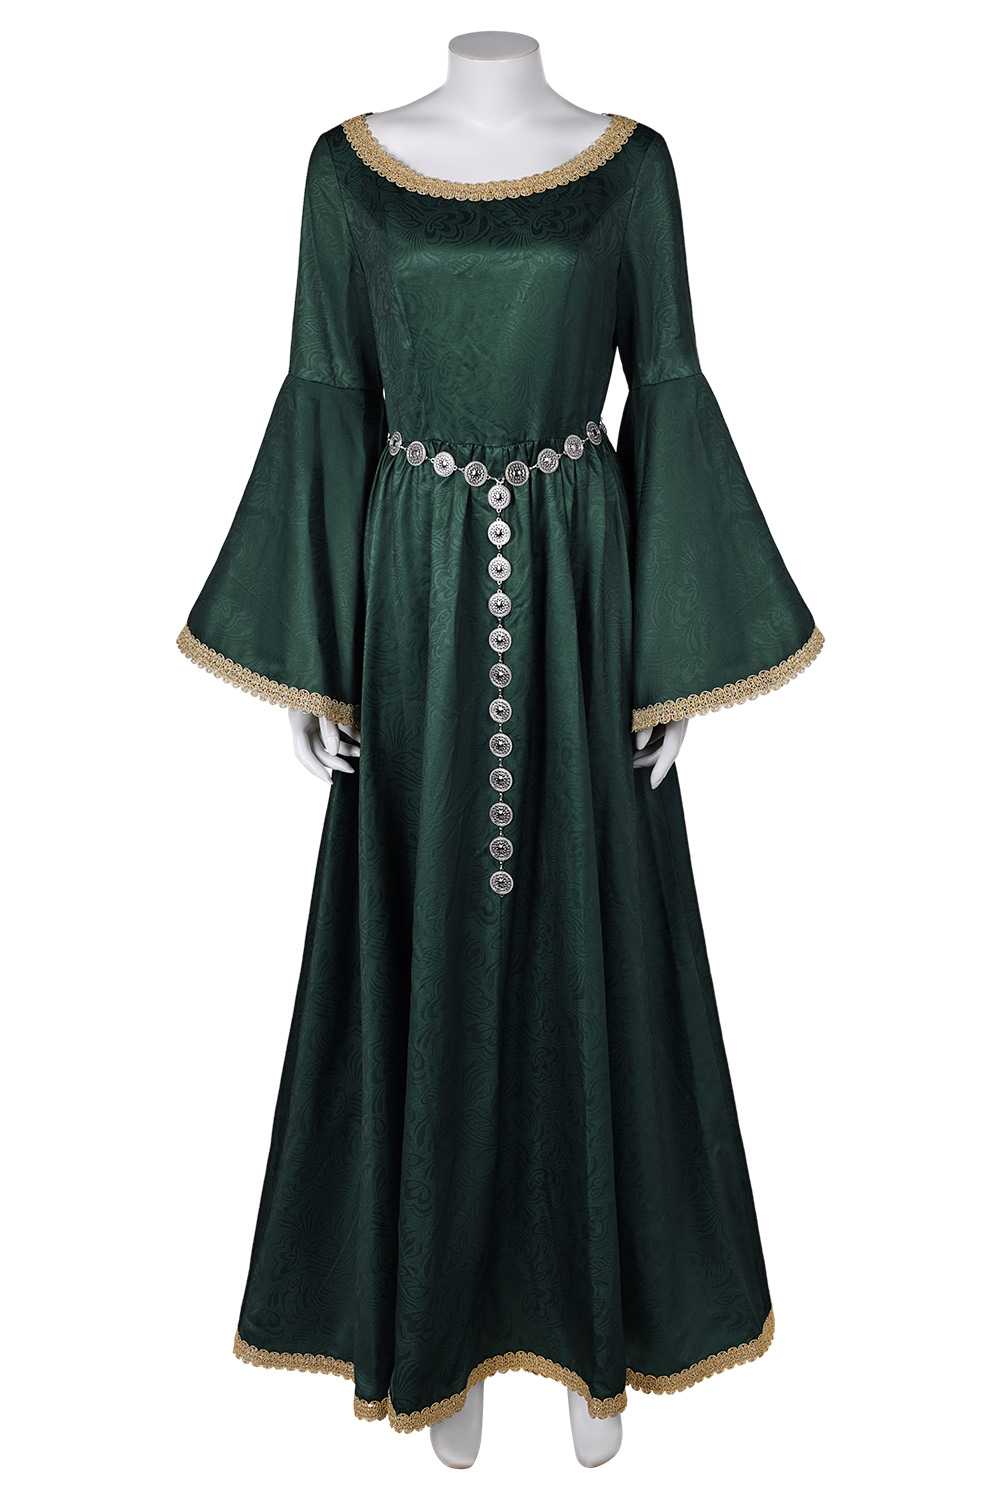 TV House of the Dragon Season 2 Alicent Hightower Green Dress Outfits Halloween Carnival Suit Cosplay Costume